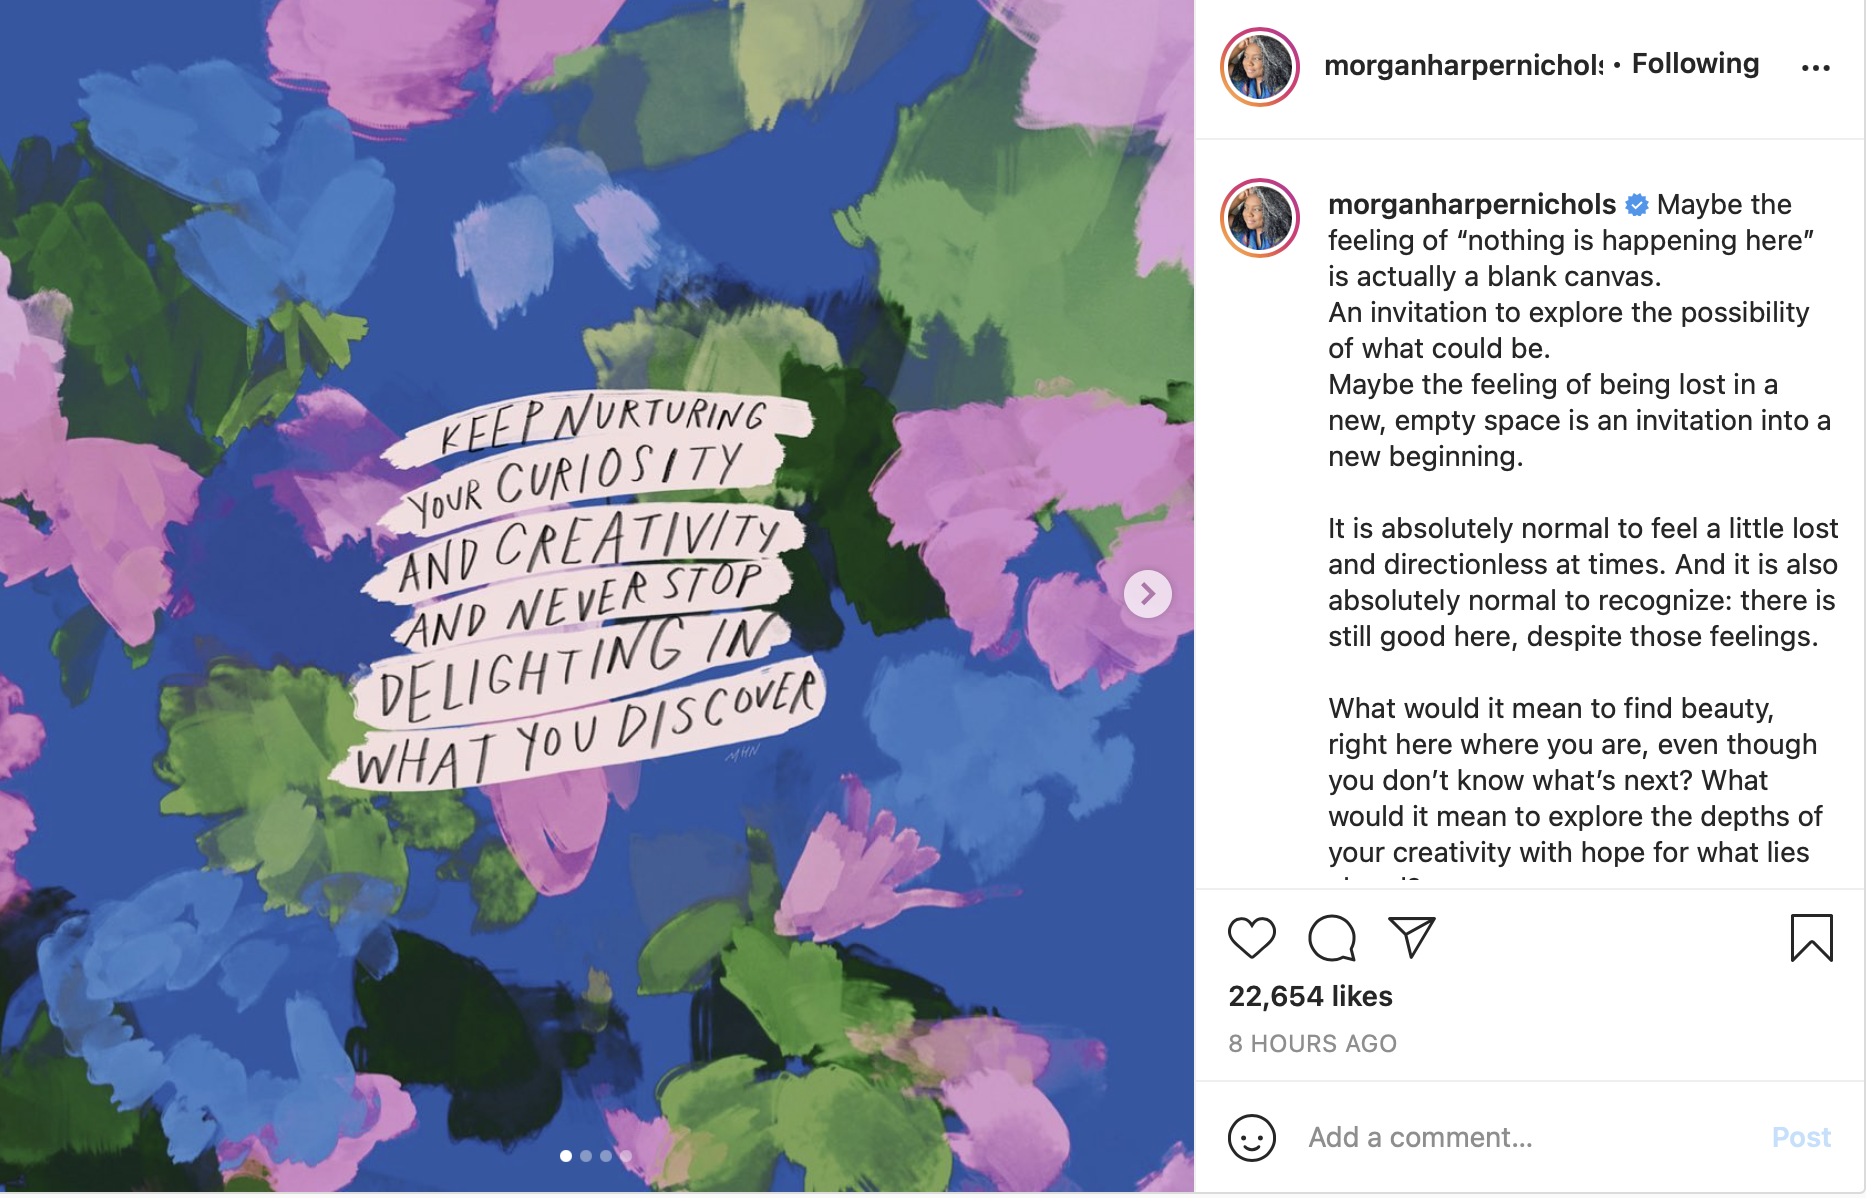 Instagram post from morganharpernichols with a poem on creativity-muse